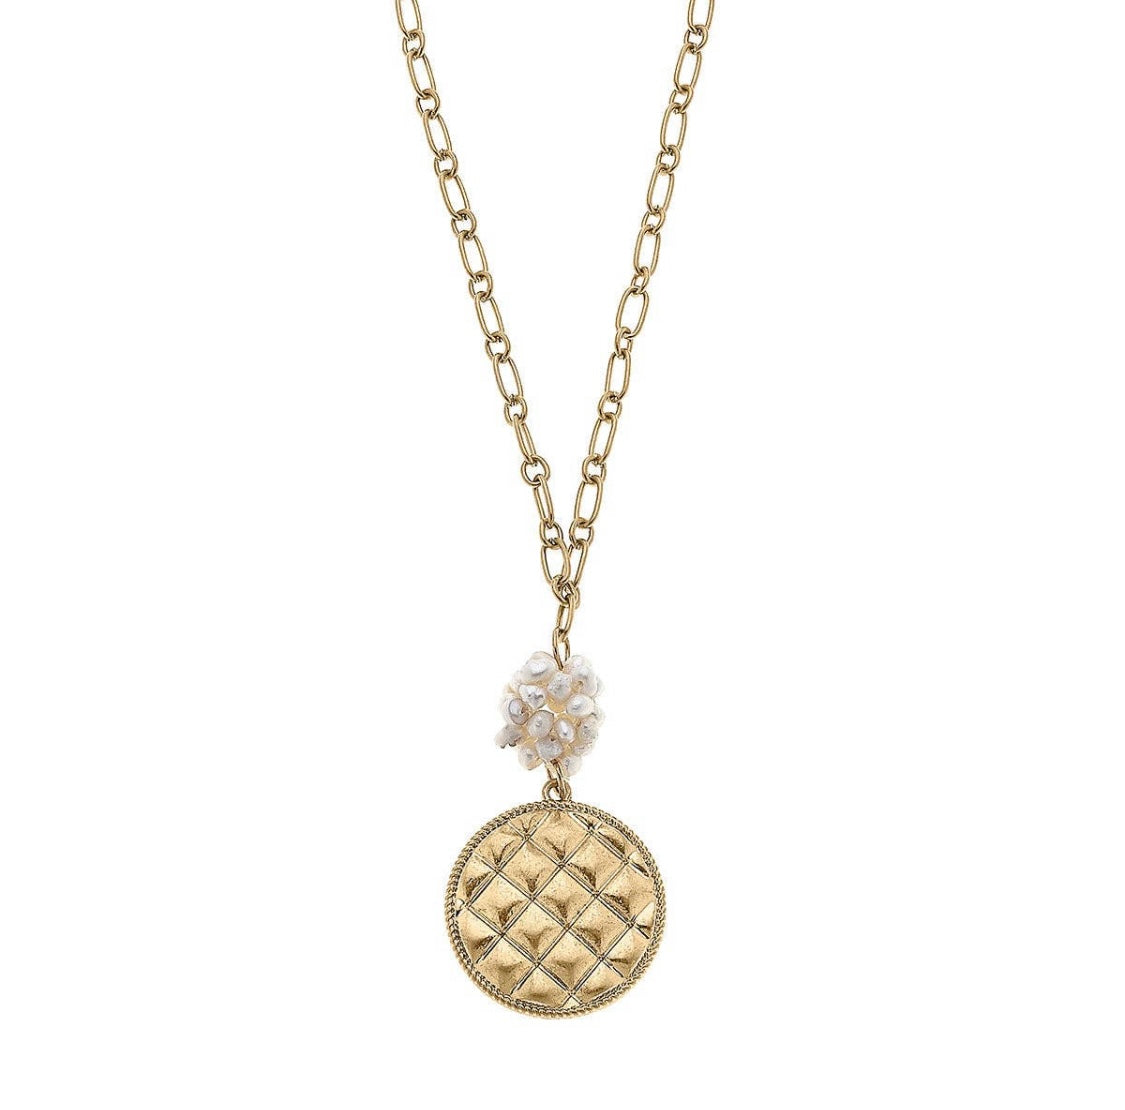 Giada Pearl & Quilted Metal Pendant Necklace